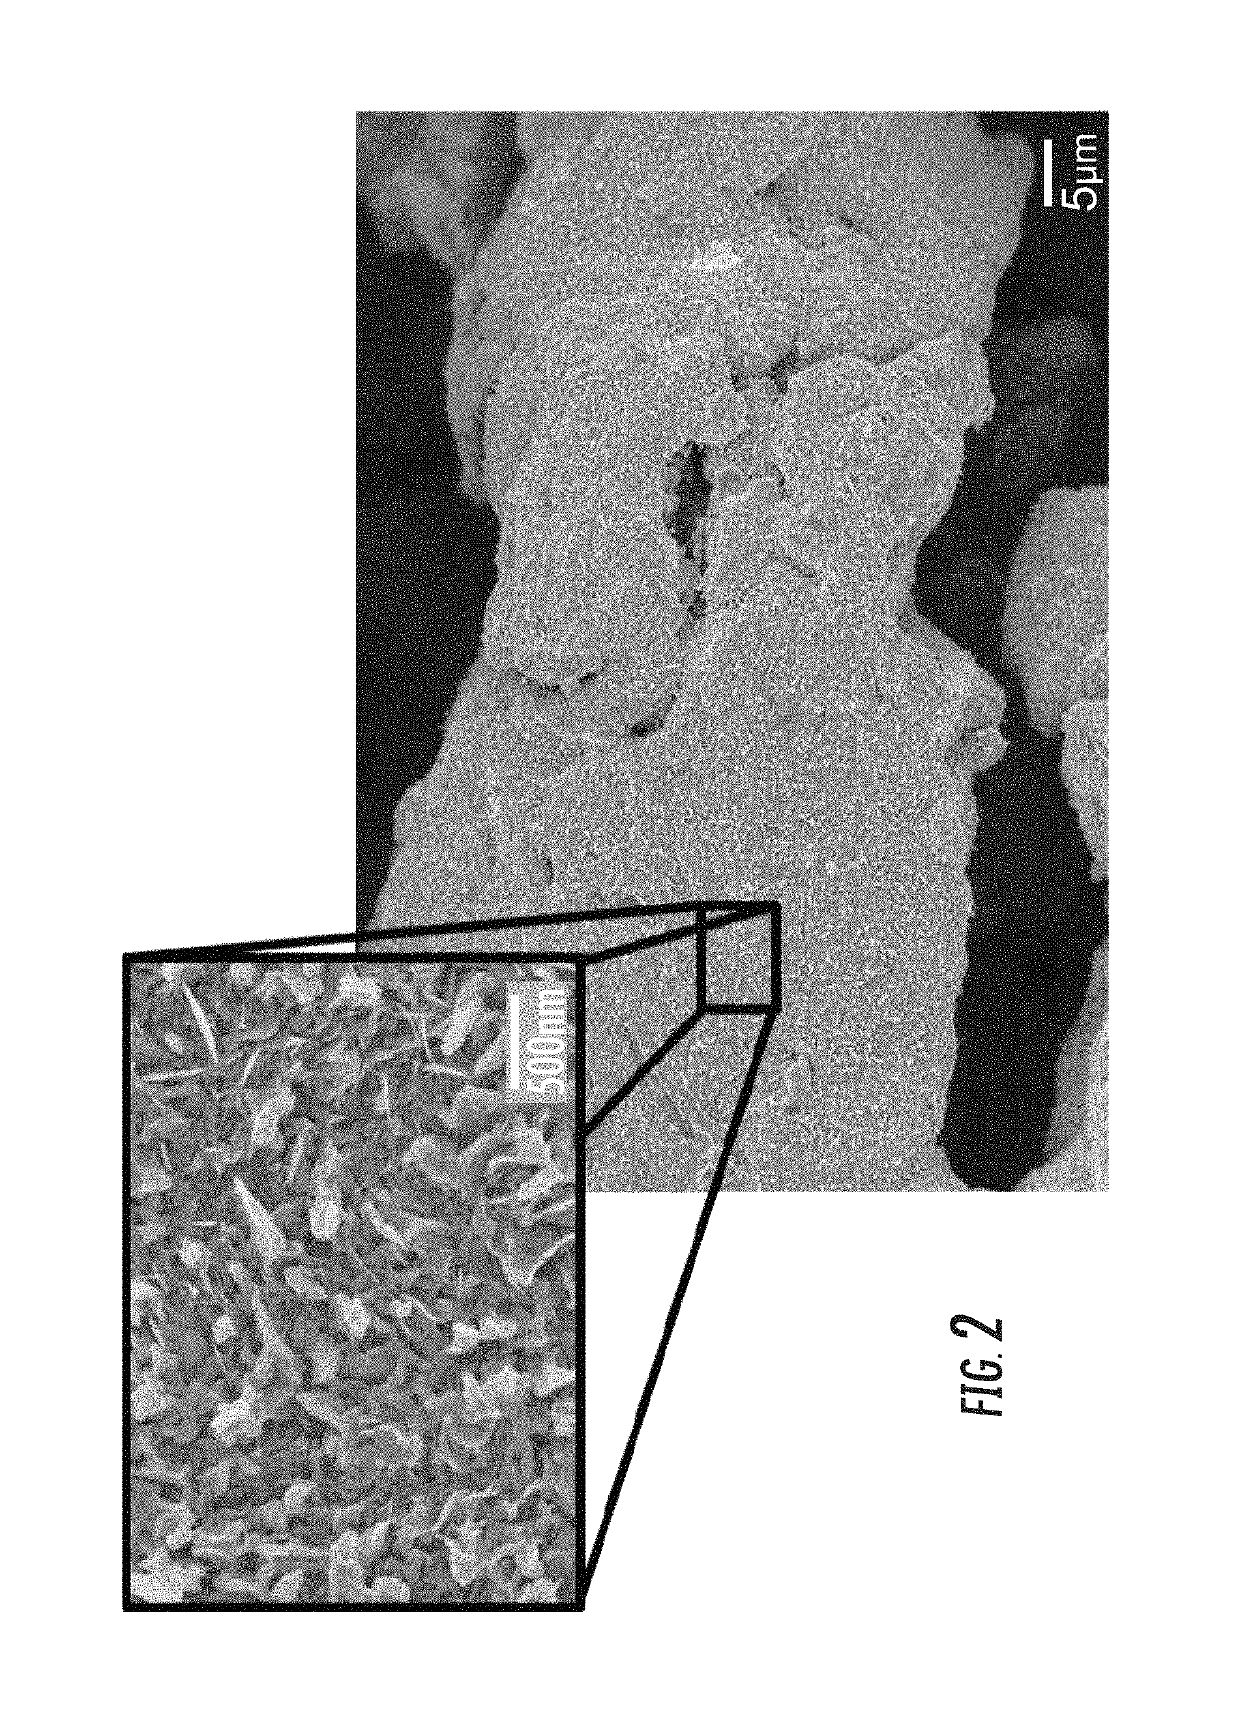 Metallic foam anode coated with active oxide material